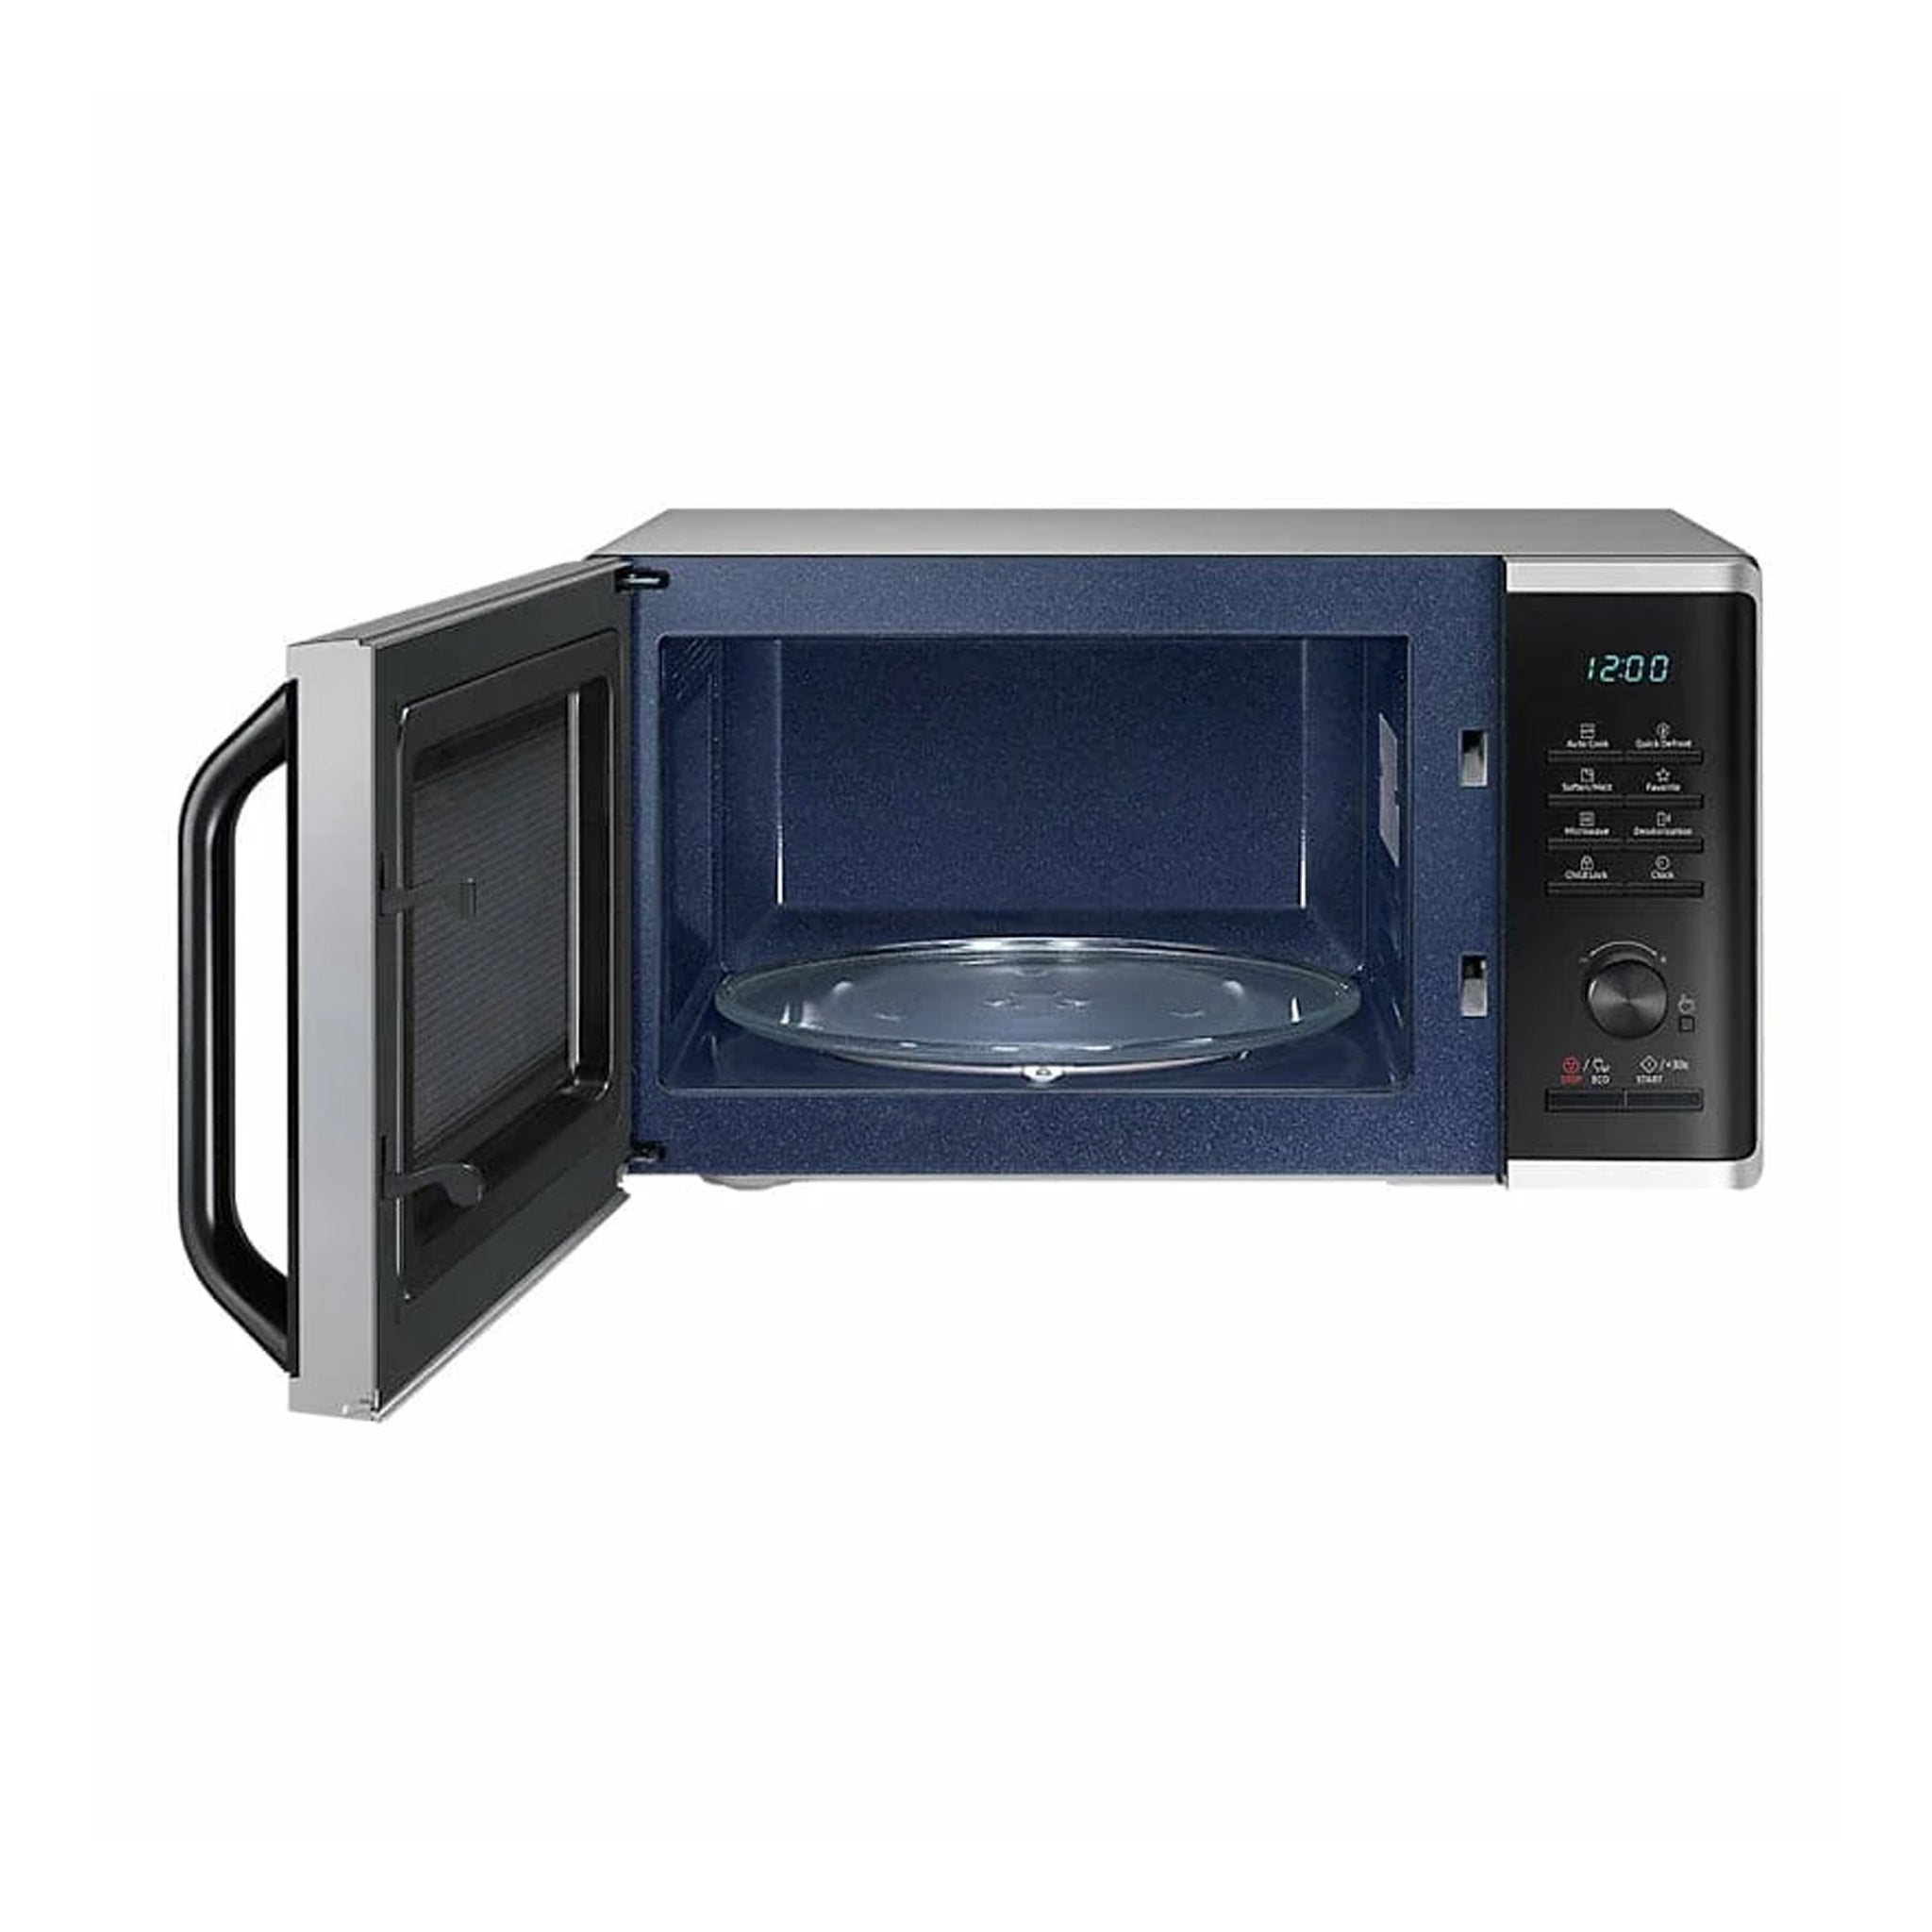 Samsung 23L MS23K3515AS Microwave Oven Samsung